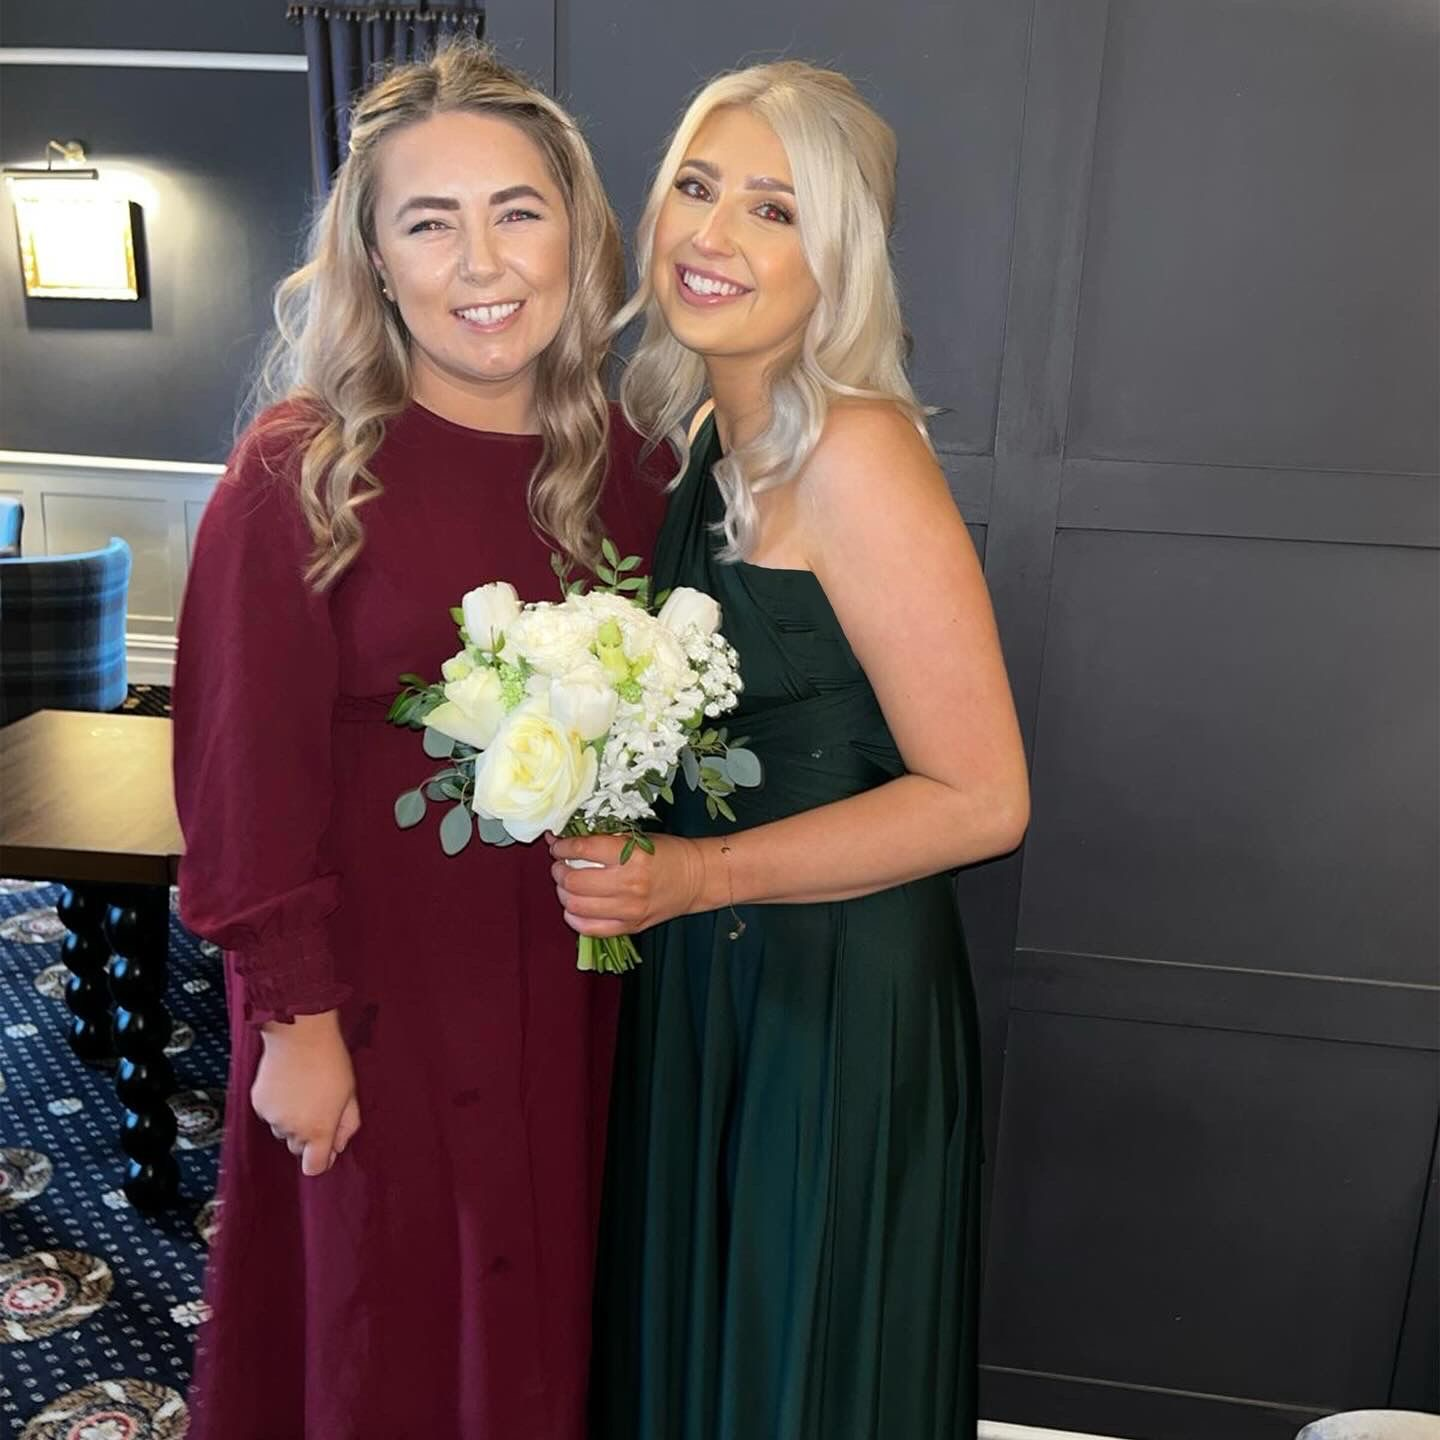 An image of Lucy and Johanna. Lucy is a woman wearing a maroon coloured dress, with blonde hair who is smiling. Next to her is Johanna, also with blonde hair and smiling. She is wearing a dark green occasion dress and is holding a bouquet of white flowers.